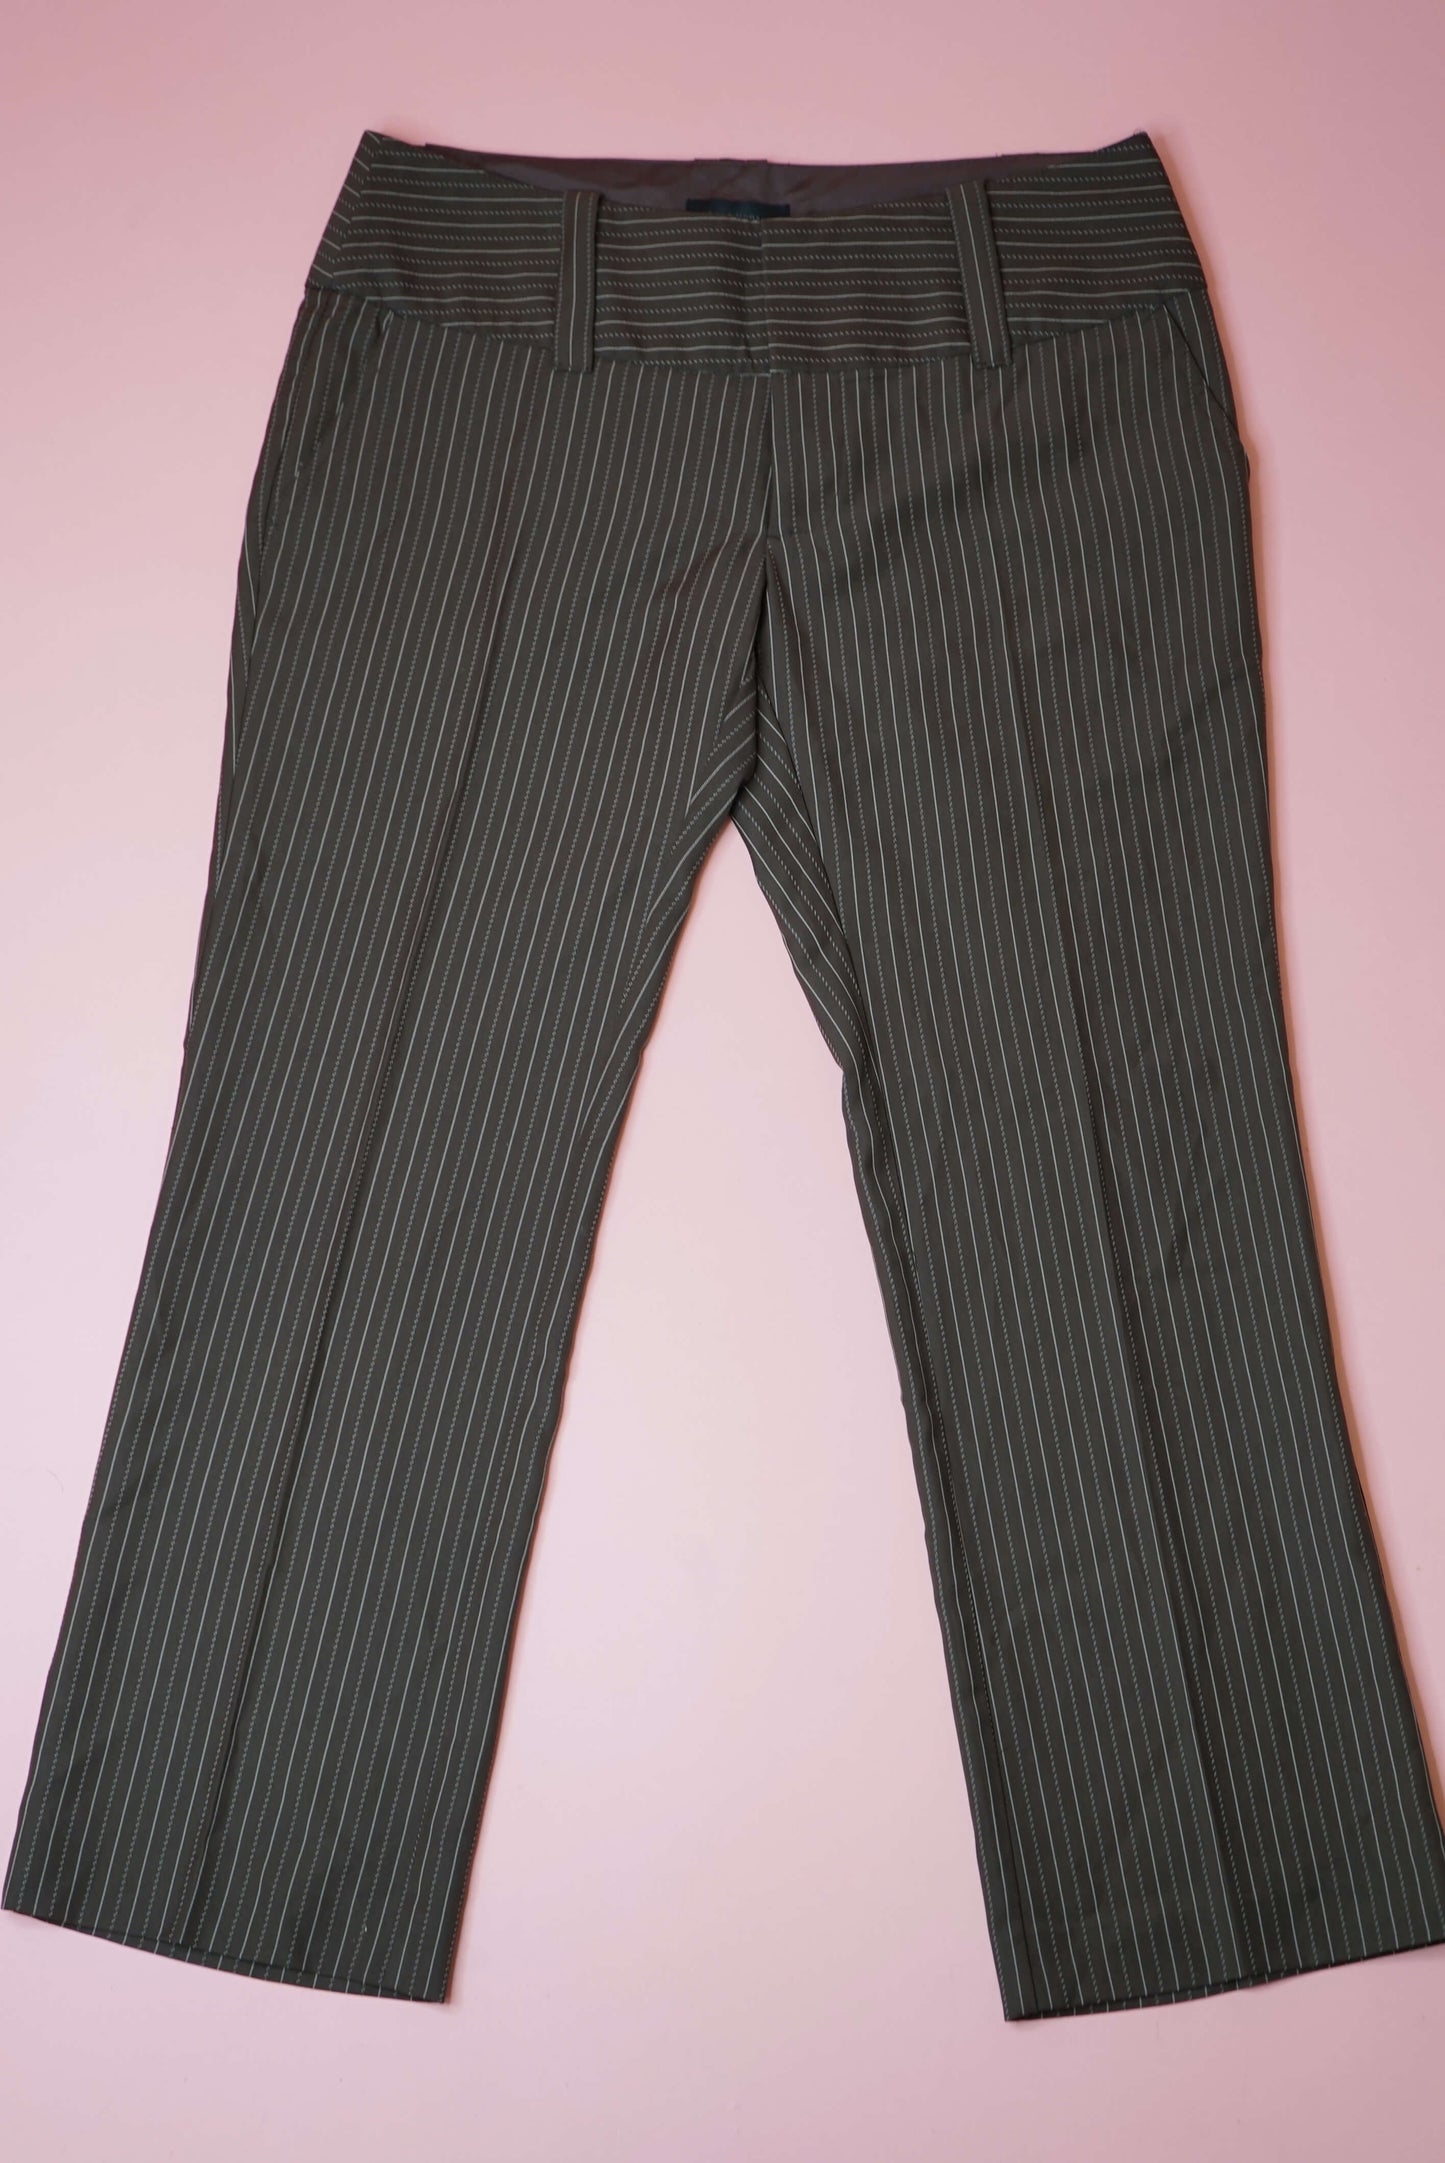 90s Y2K Low Rise Pinstripe Bootcut Trousers Dark Academia Suit Pants Wide Belt Waistband Detail W31-32